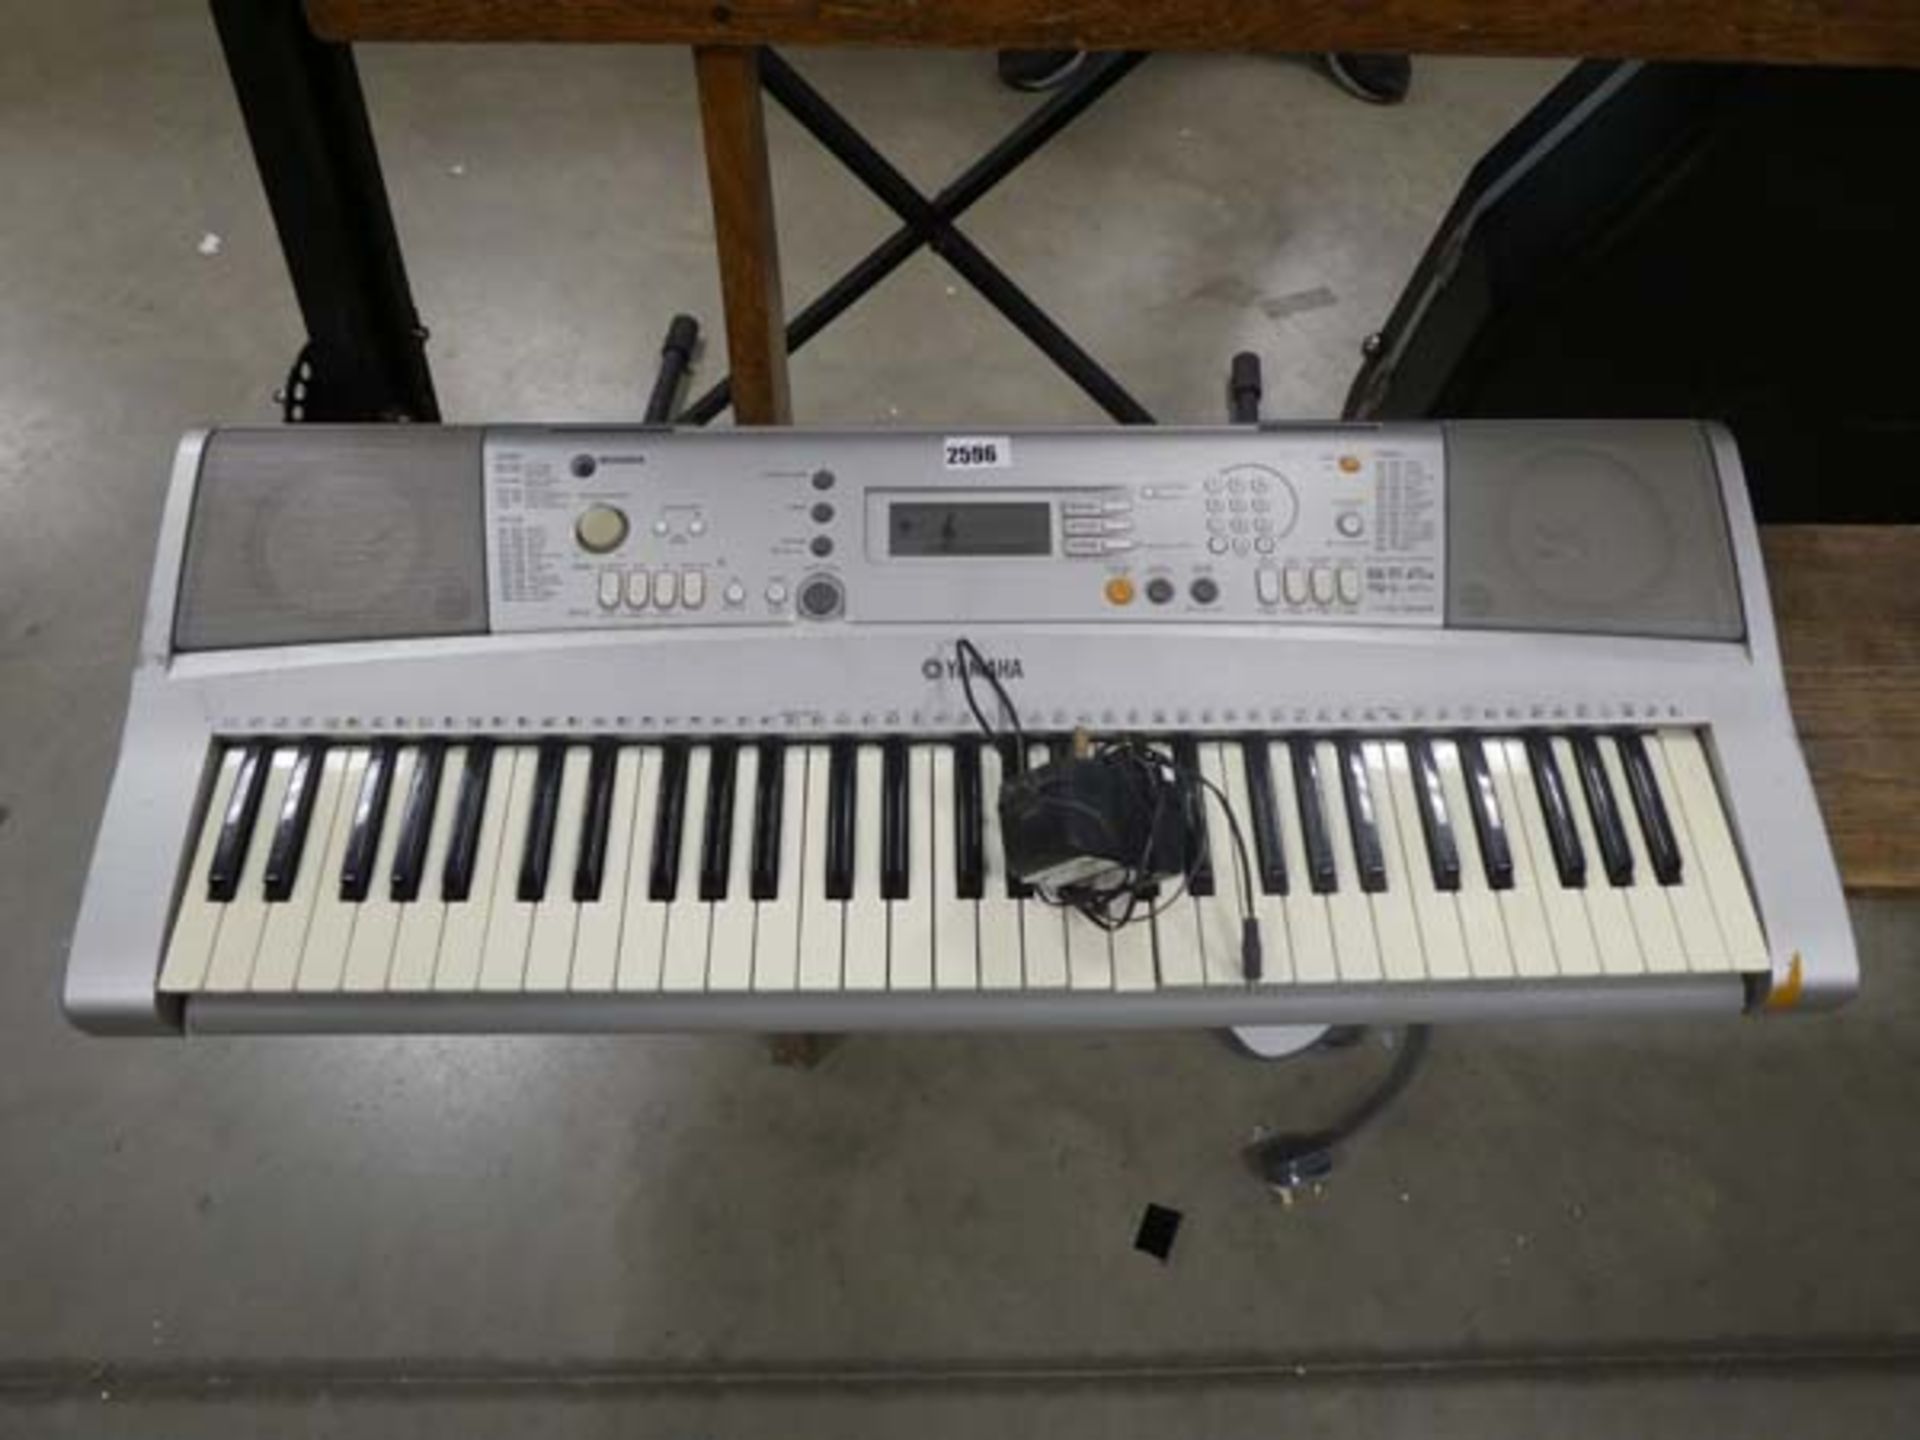 Yamaha E303 digital keyboard with stand and power supply